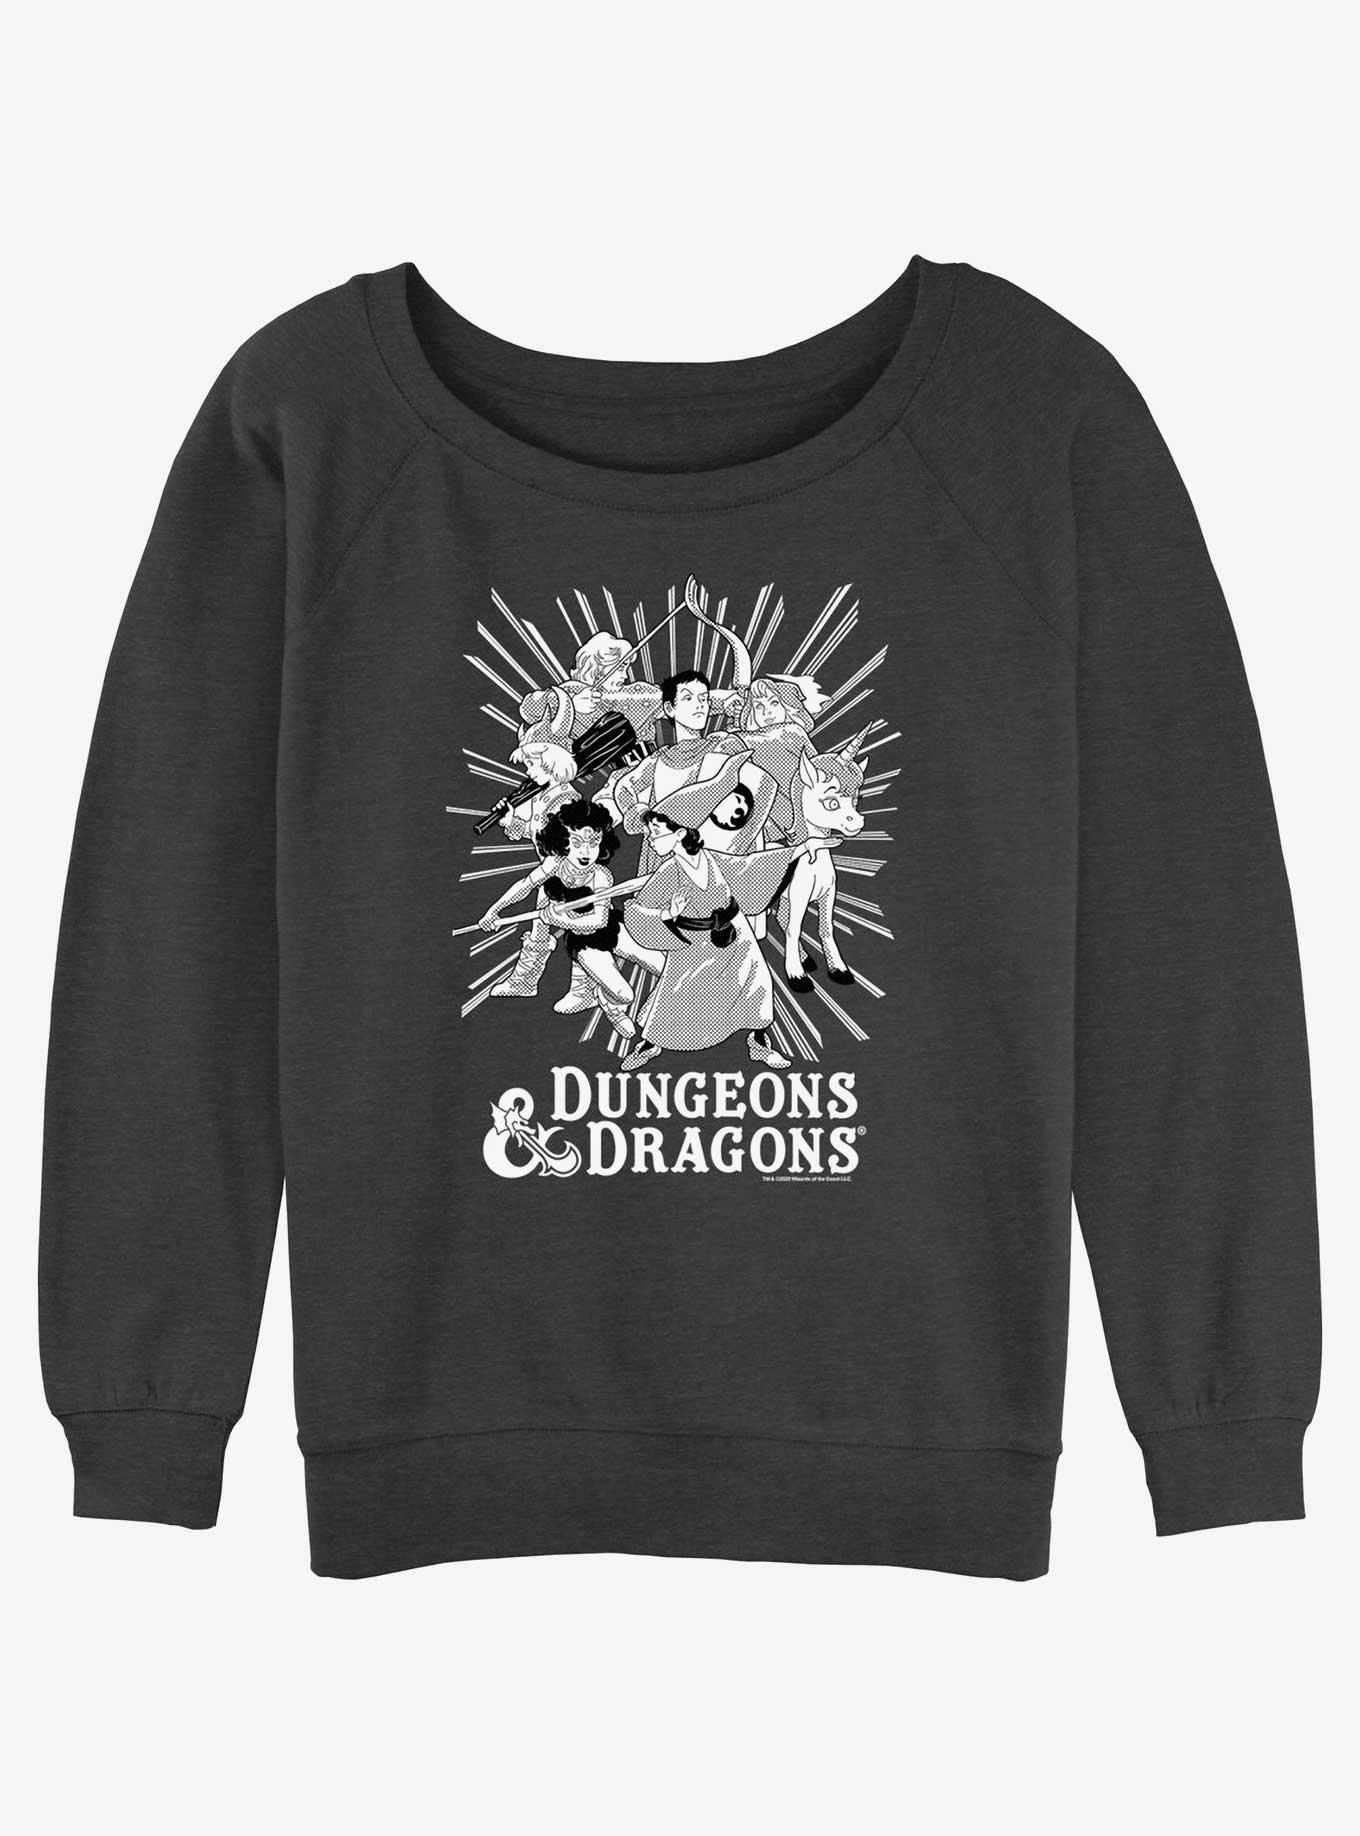 Dungeons & Dragons Group Ray Girls Slouchy Sweatshirt, CHAR HTR, hi-res